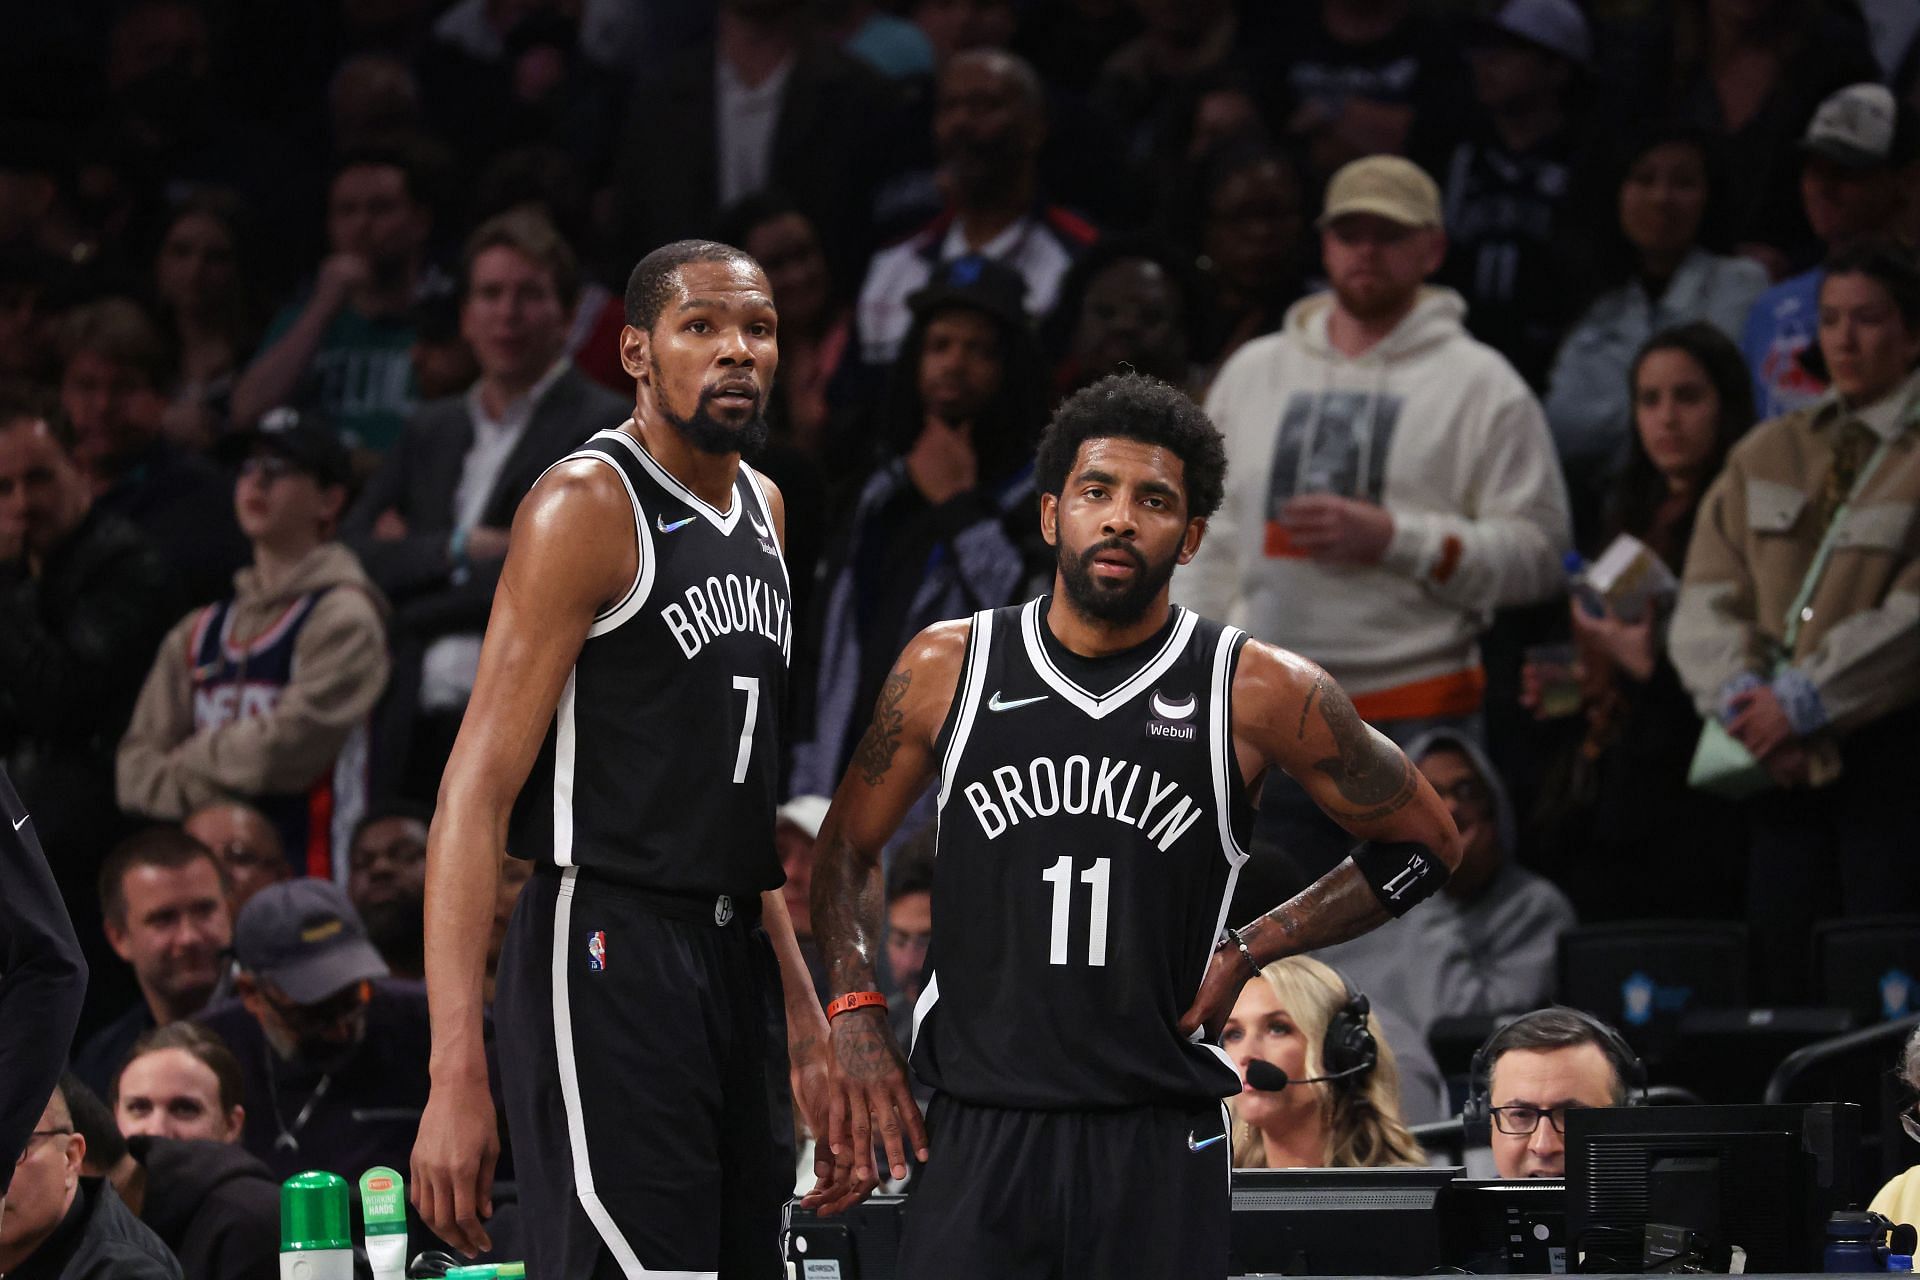 Boston Celtics v Brooklyn Nets - Game Three; Kyrie Irving and Kevin Durant react after loss